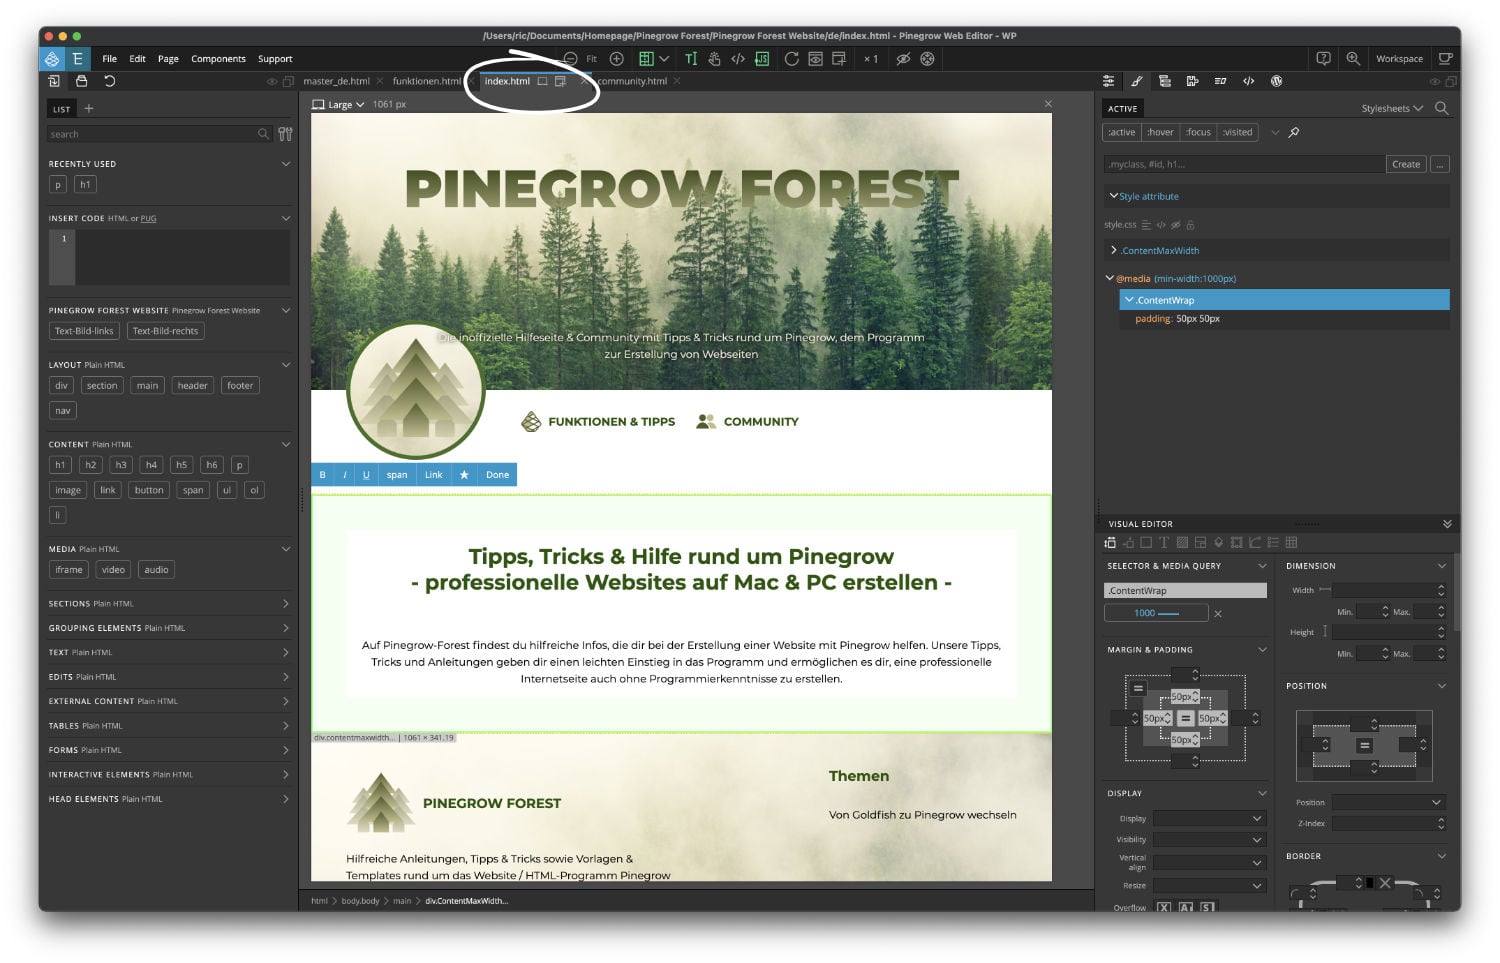 Pinegrow middle workspace: edit your website directly graphically - Pinegrow-Forest